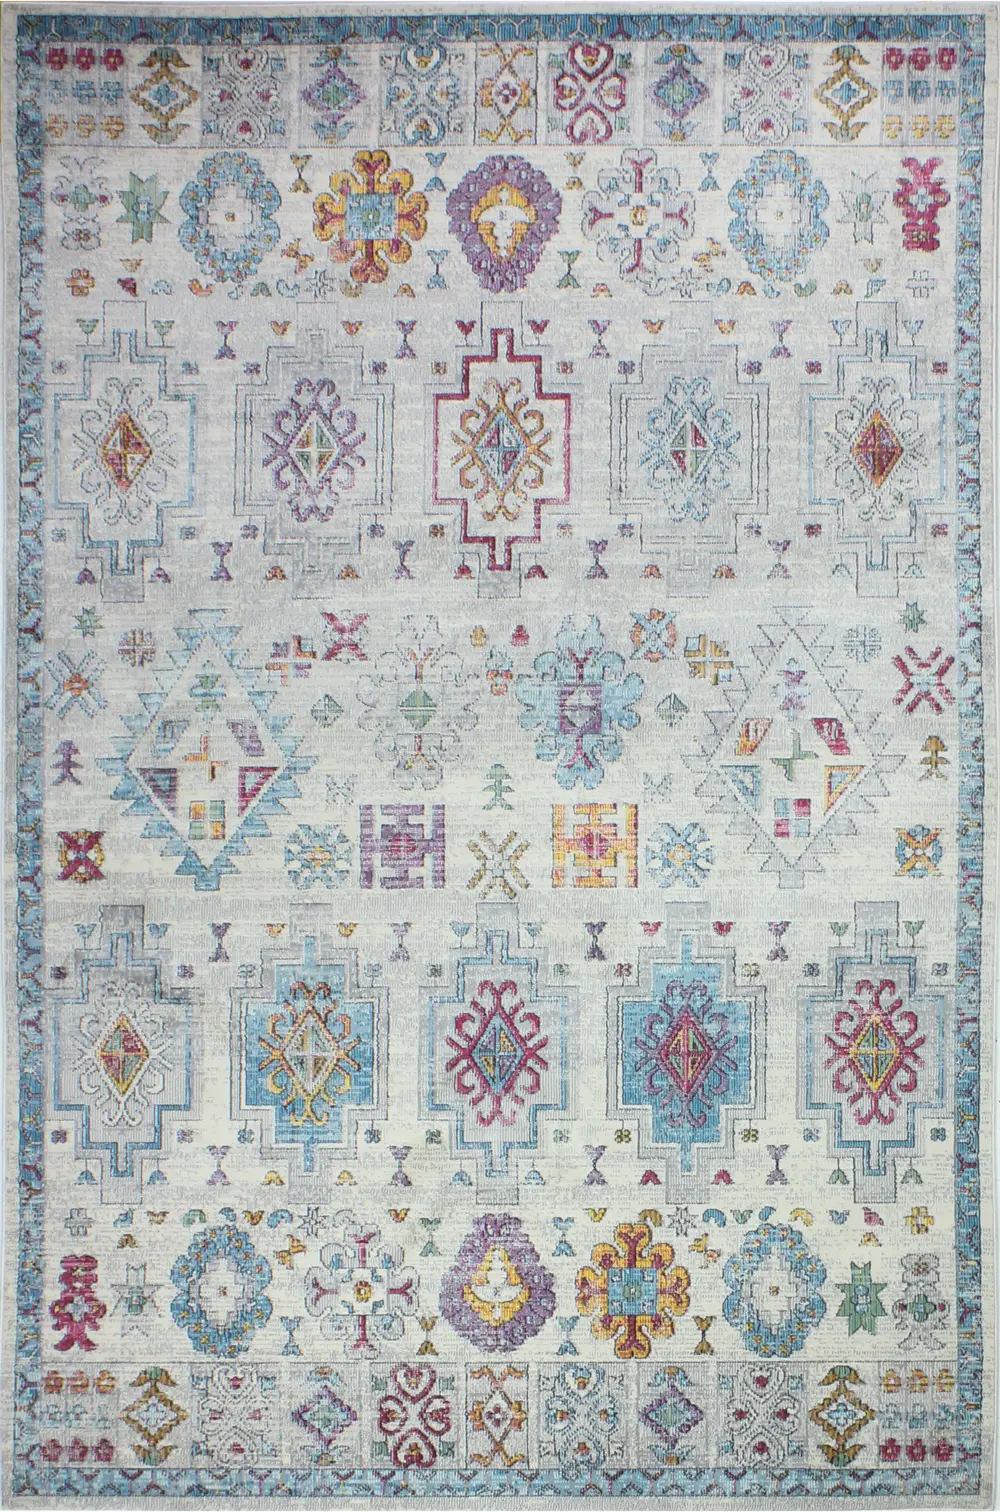 C186-IV-26x8-RO25A Transitional Ivory and Blue 8 Foot Runner Rug - Charleston-1